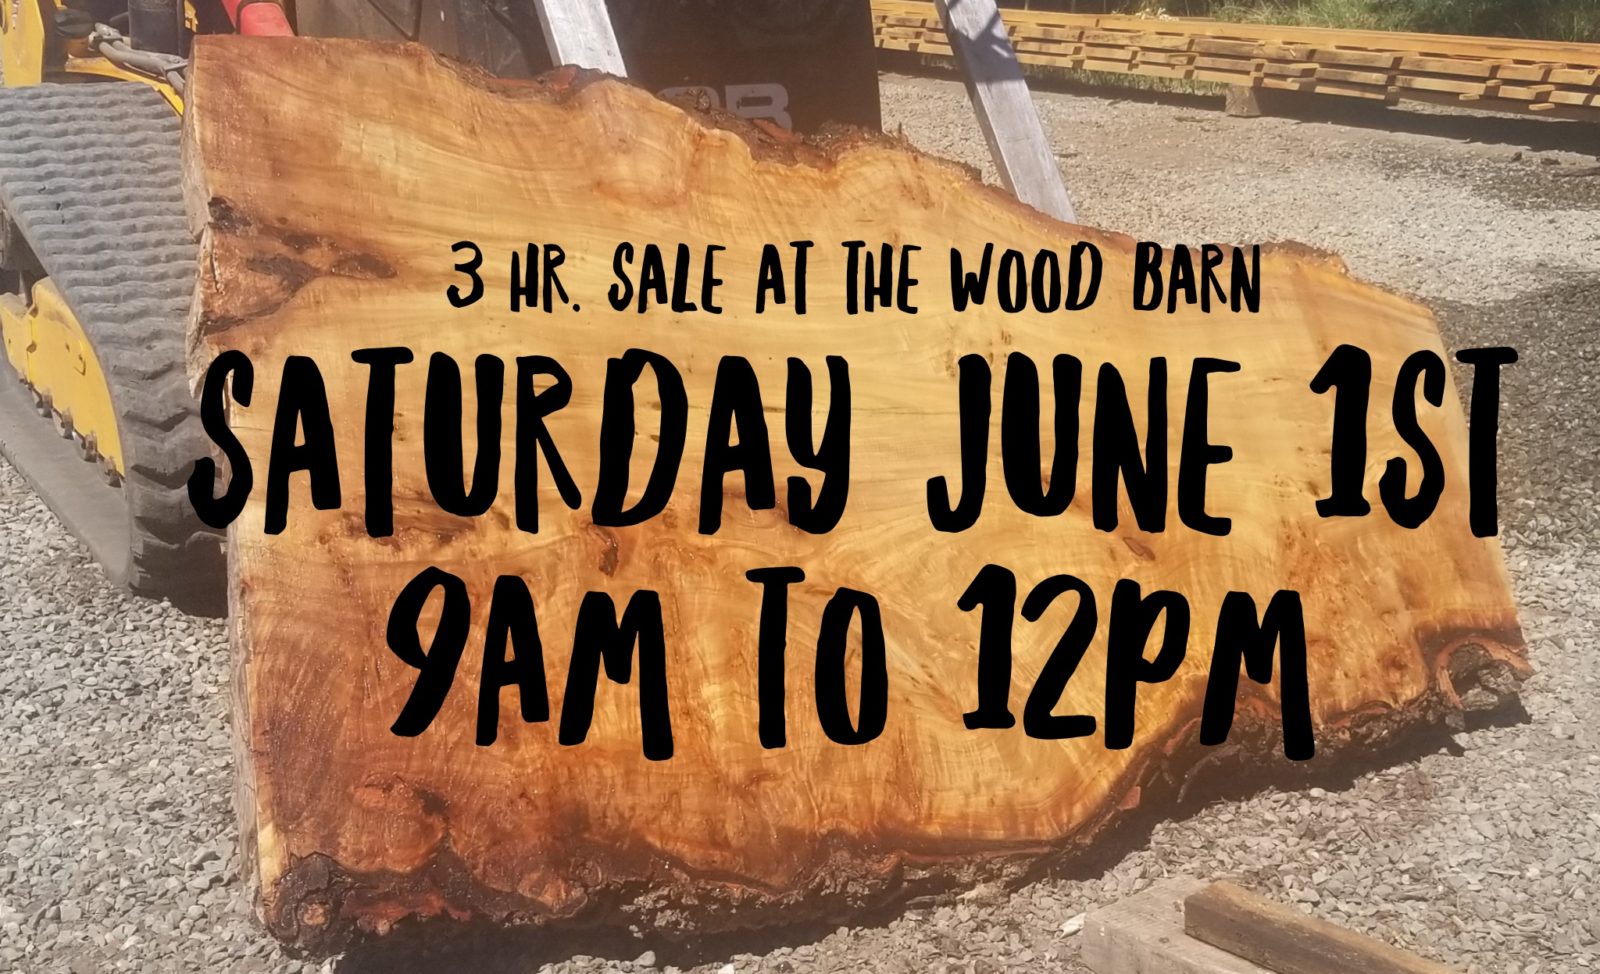 wood sale at the wood barn 3 hour sale